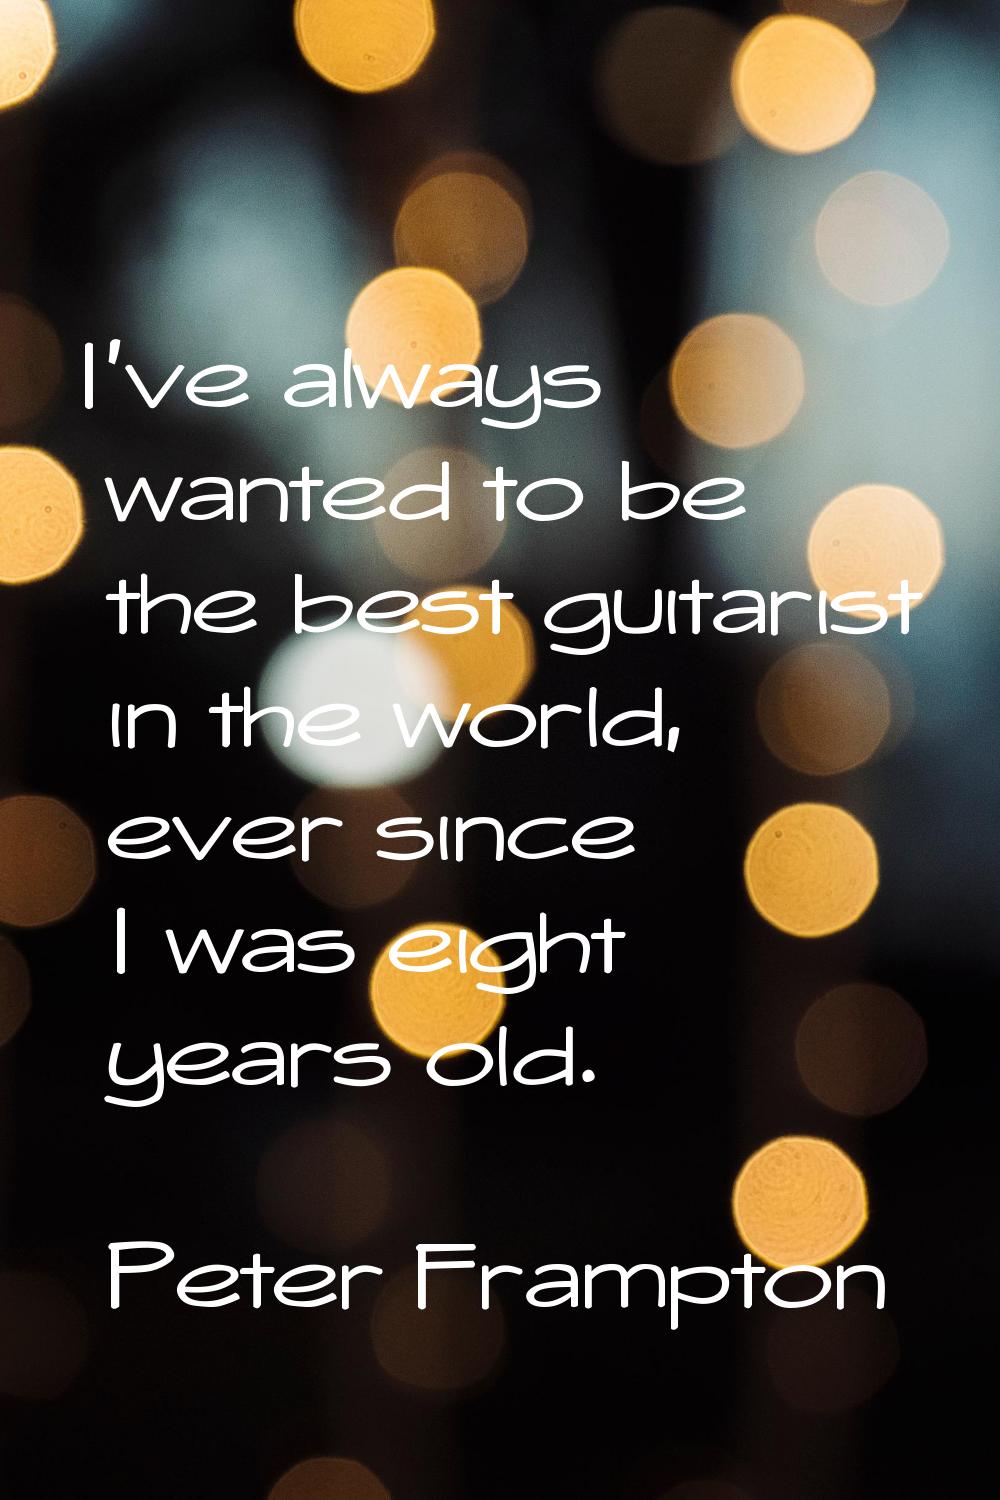 I've always wanted to be the best guitarist in the world, ever since I was eight years old.